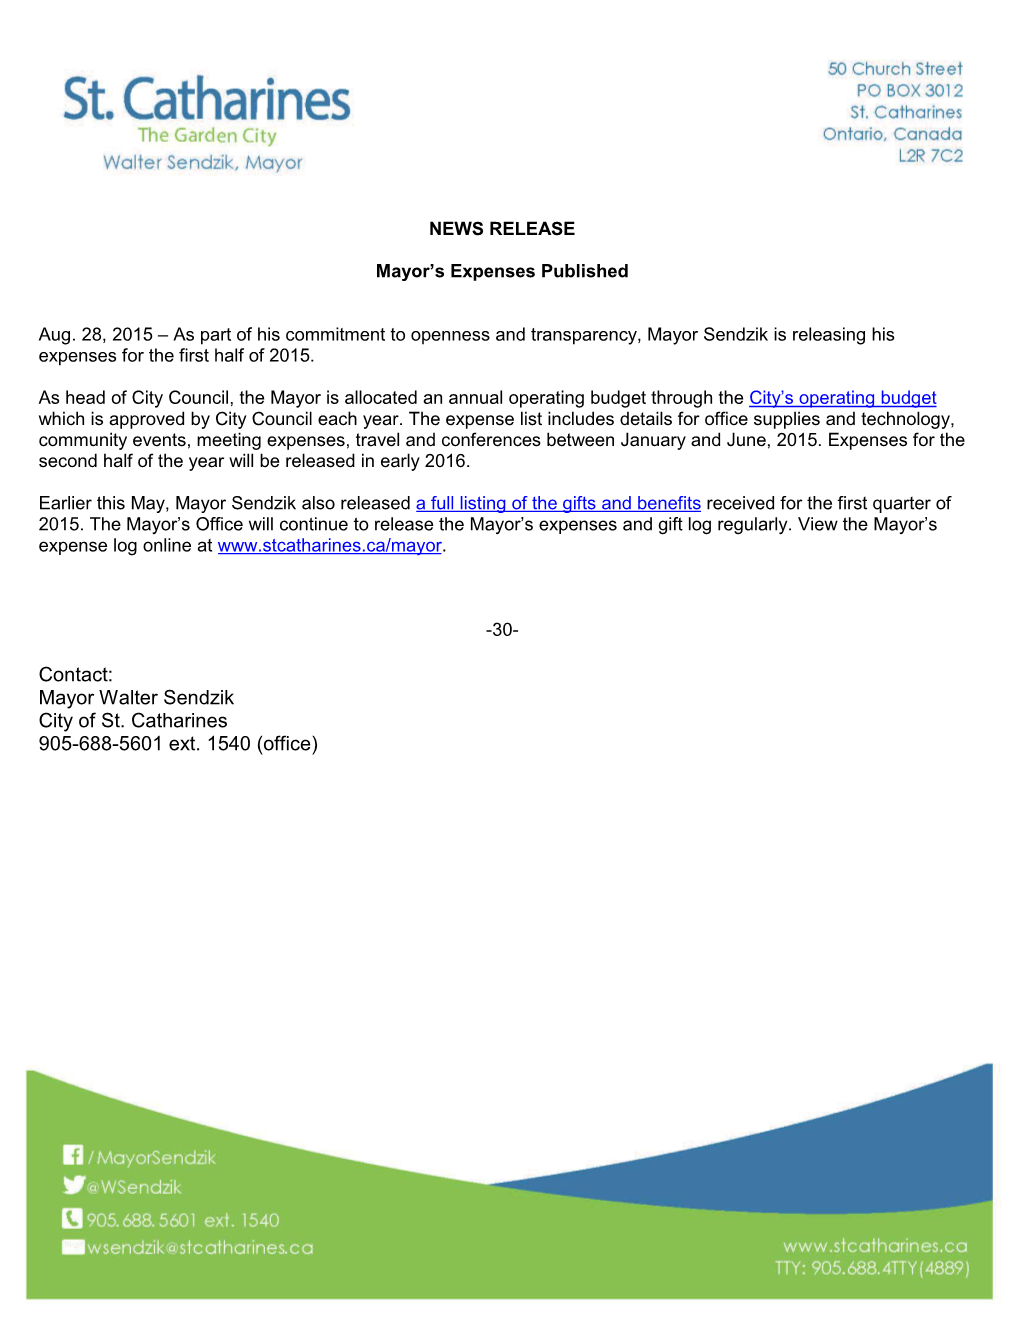 Mayor Walter Sendzik City of St. Catharines 905-688-5601 Ext. 1540 (Office) MAYOR's OFFICE EXPENSE ANALYSIS for the PERIOD of JANAURY 1-JUNE 30, 2015